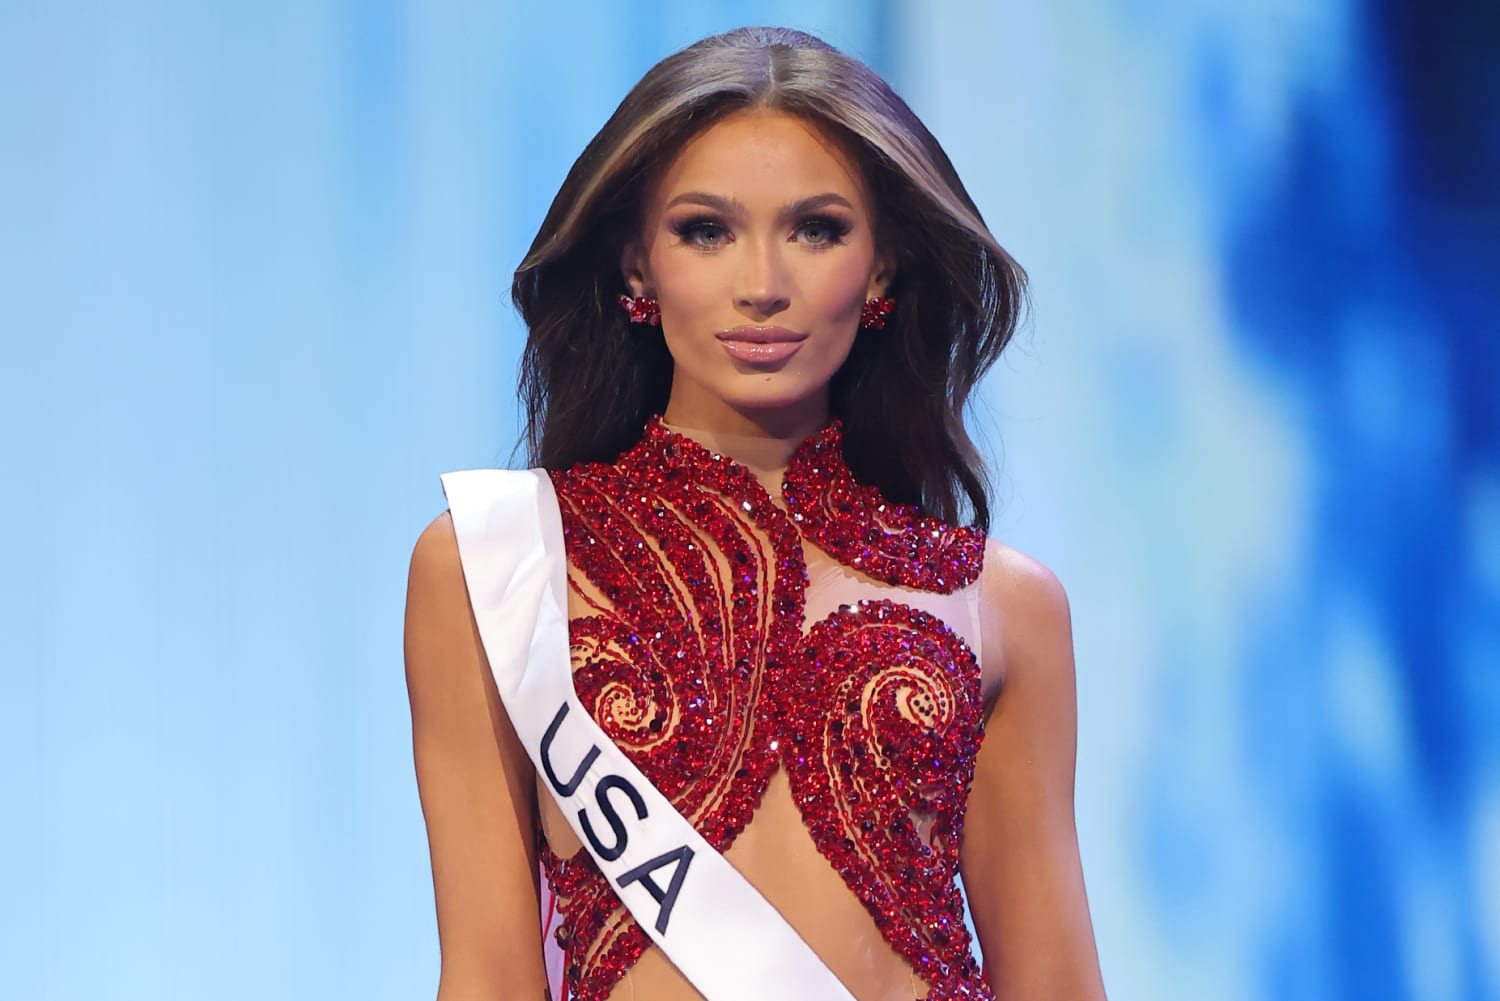 Miss USA’s resignation letter accuses the organization of a toxic work culture